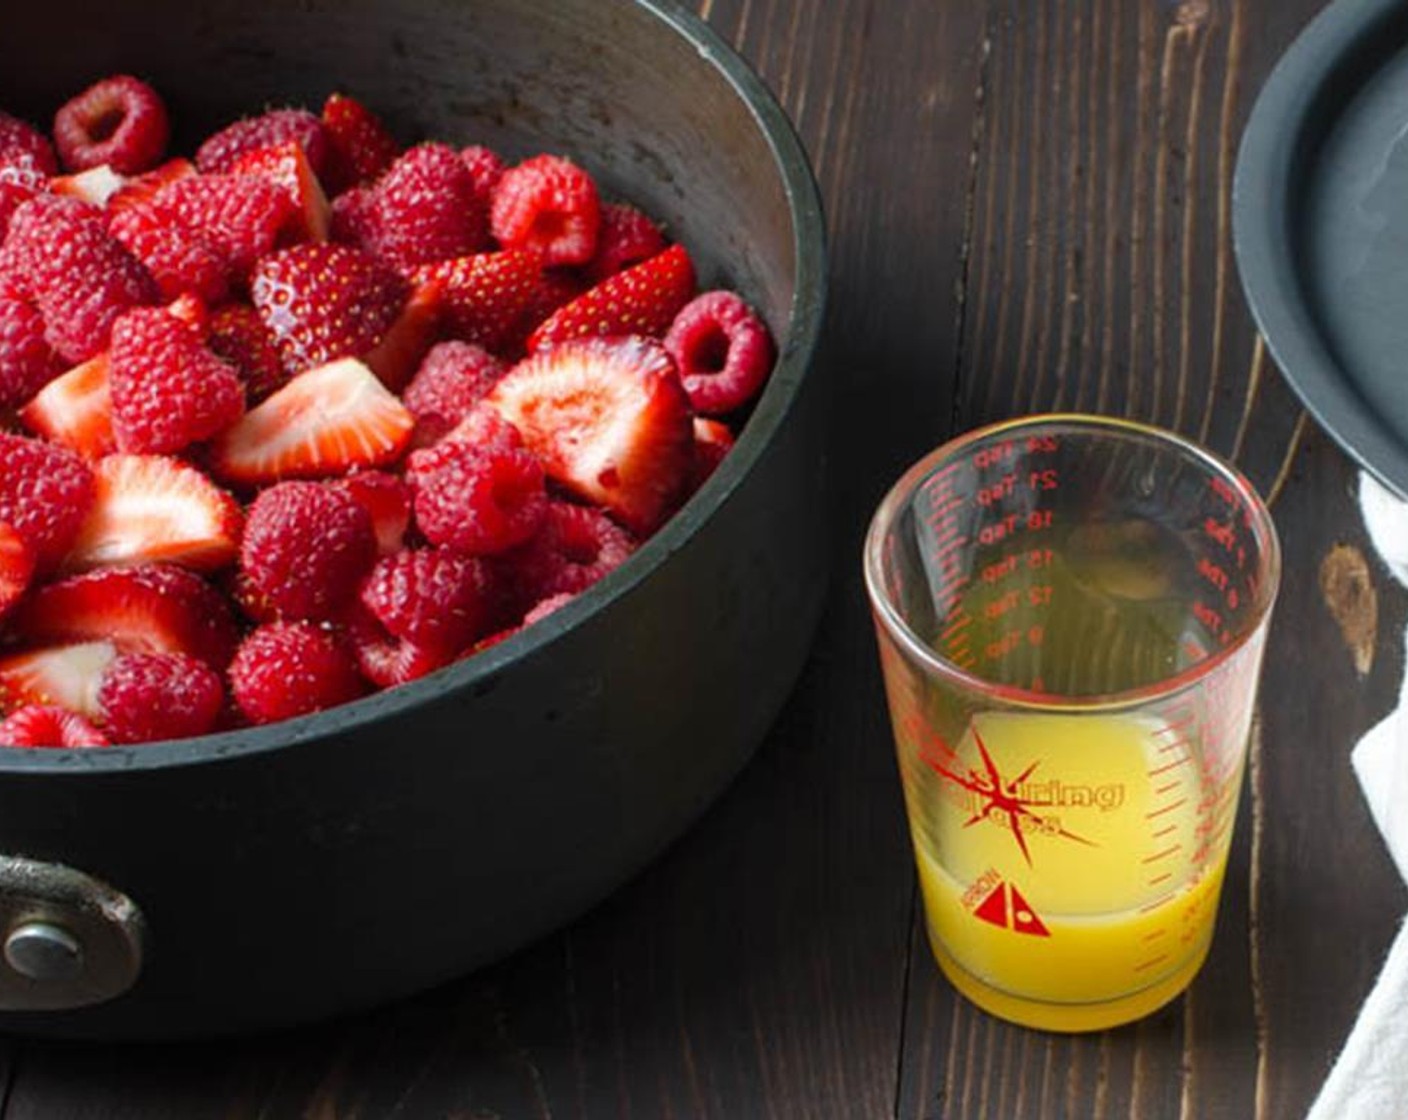 step 2 In a heavy-bottomed saucepan, heat the fresh strawberries, Fresh Raspberries (1 1/3 cups), and Orange (1/2) over medium-high heat until the fruit starts to break down and soften for about 5 to 10 minutes.